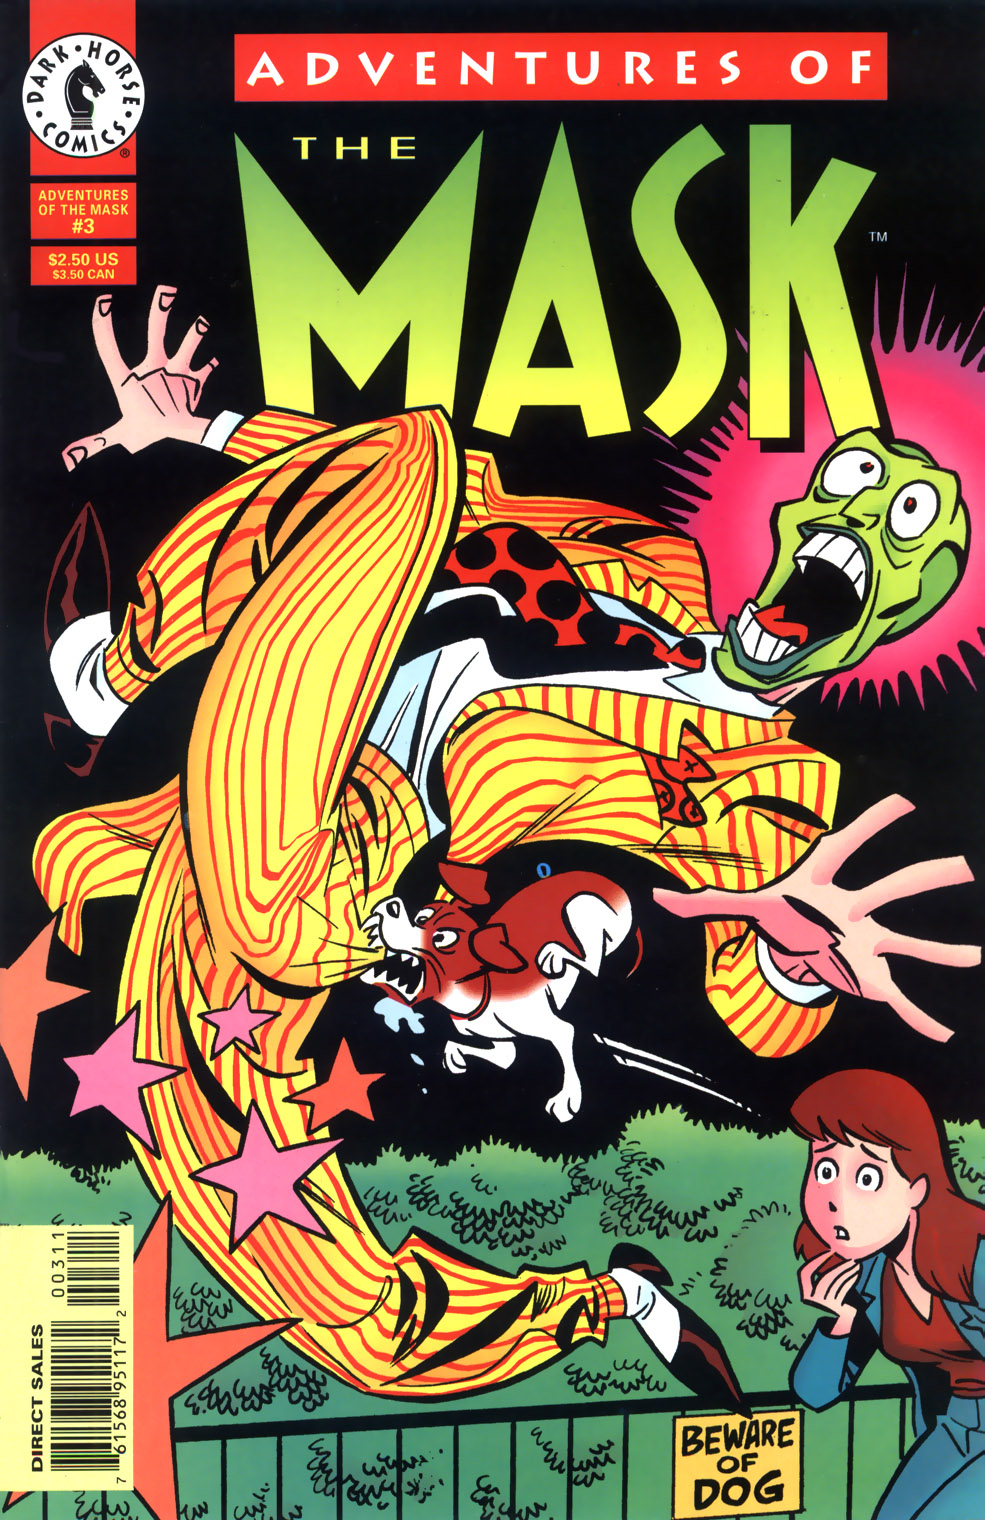 Adventures of the Mask Issue 3 | The Mask Wiki |